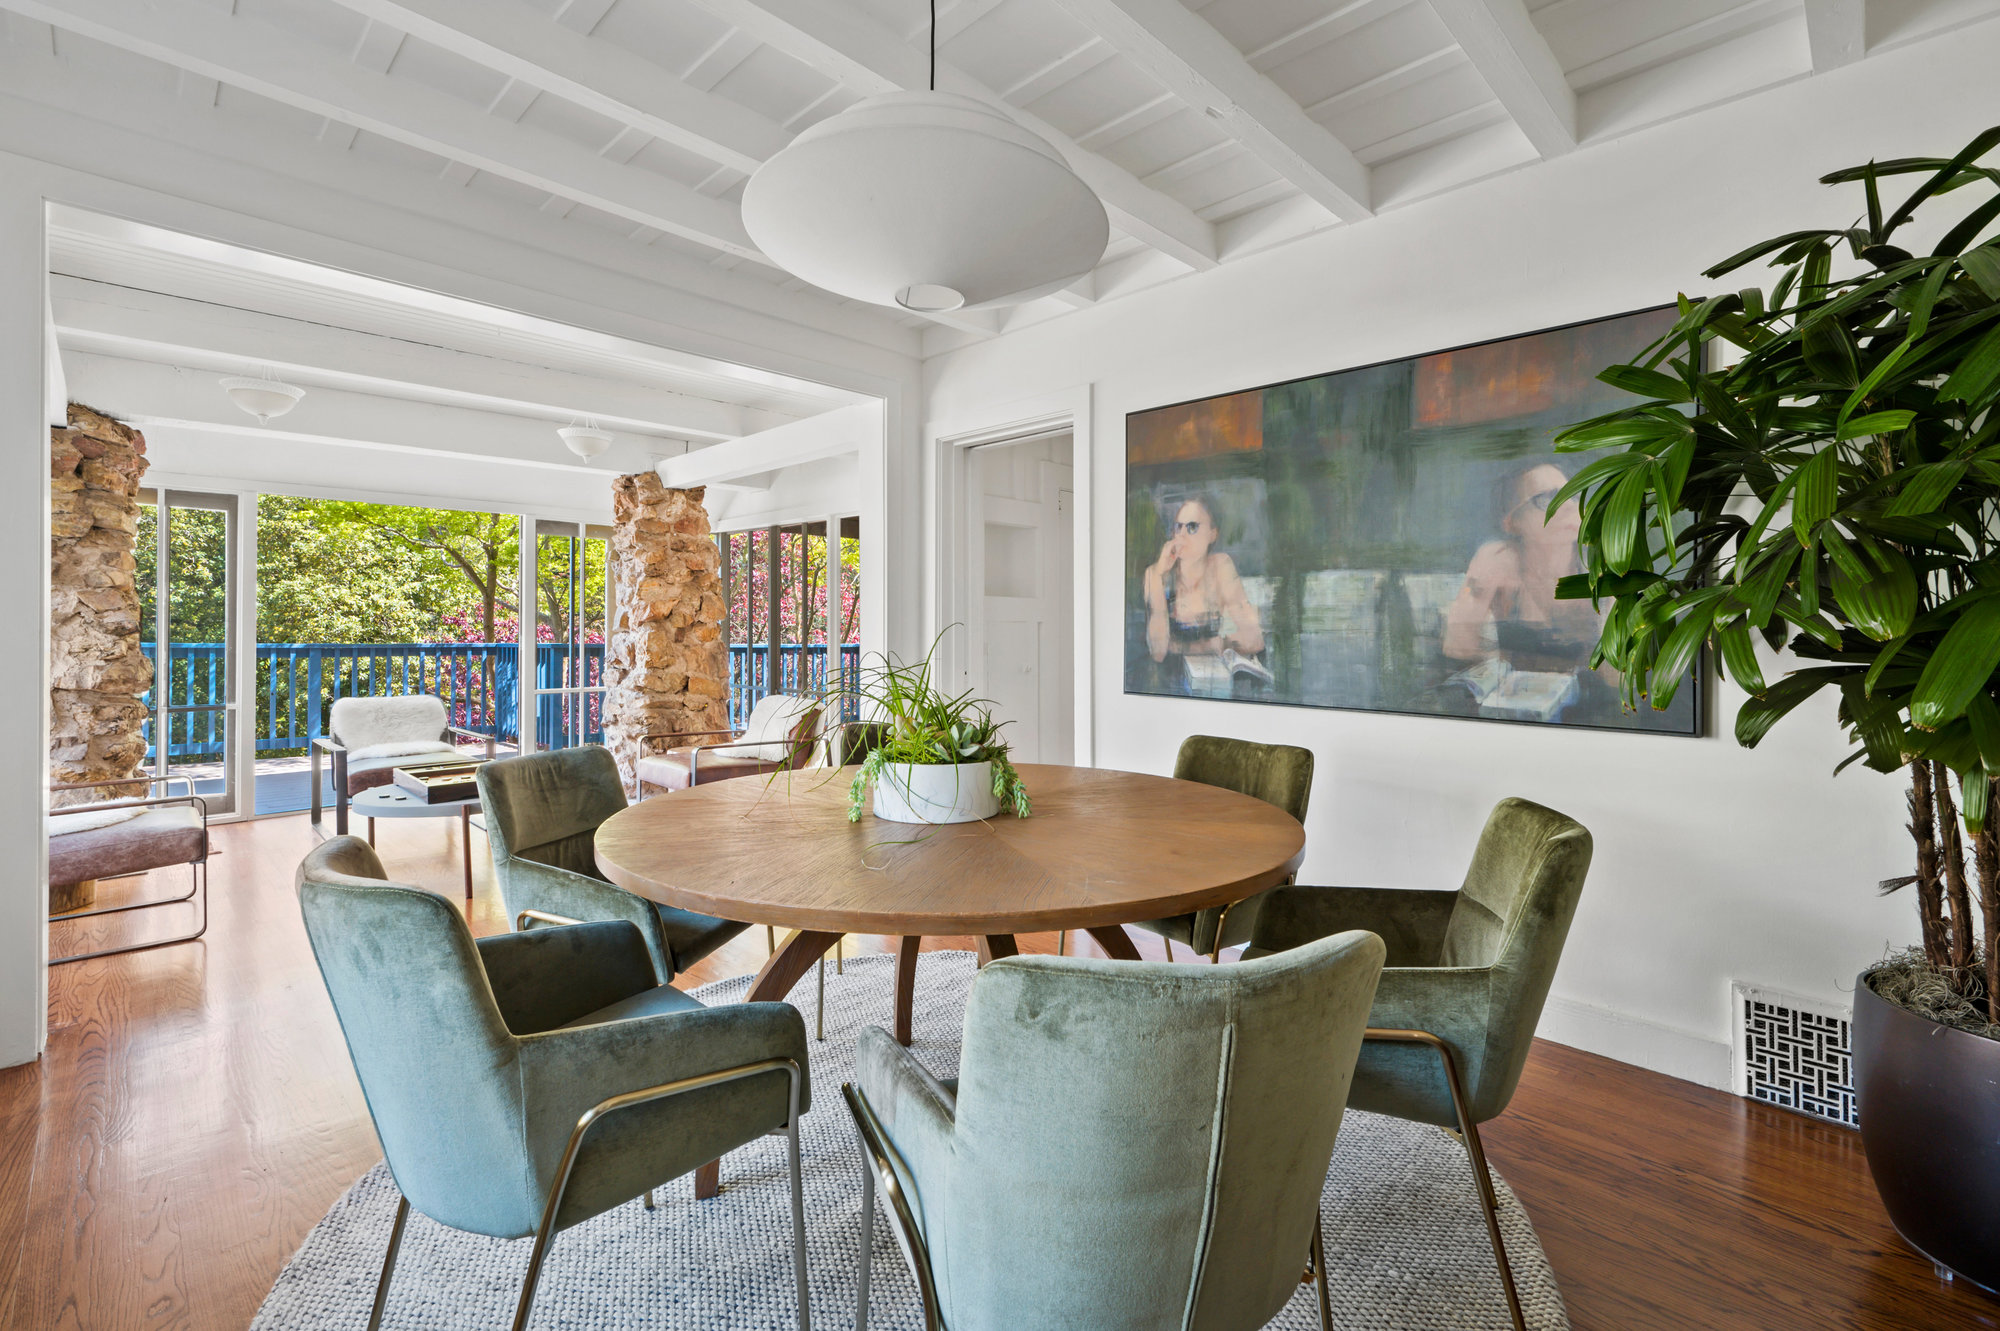 Property Photo: Dining and sitting area off main entry. There is round dining table that seats 5. 